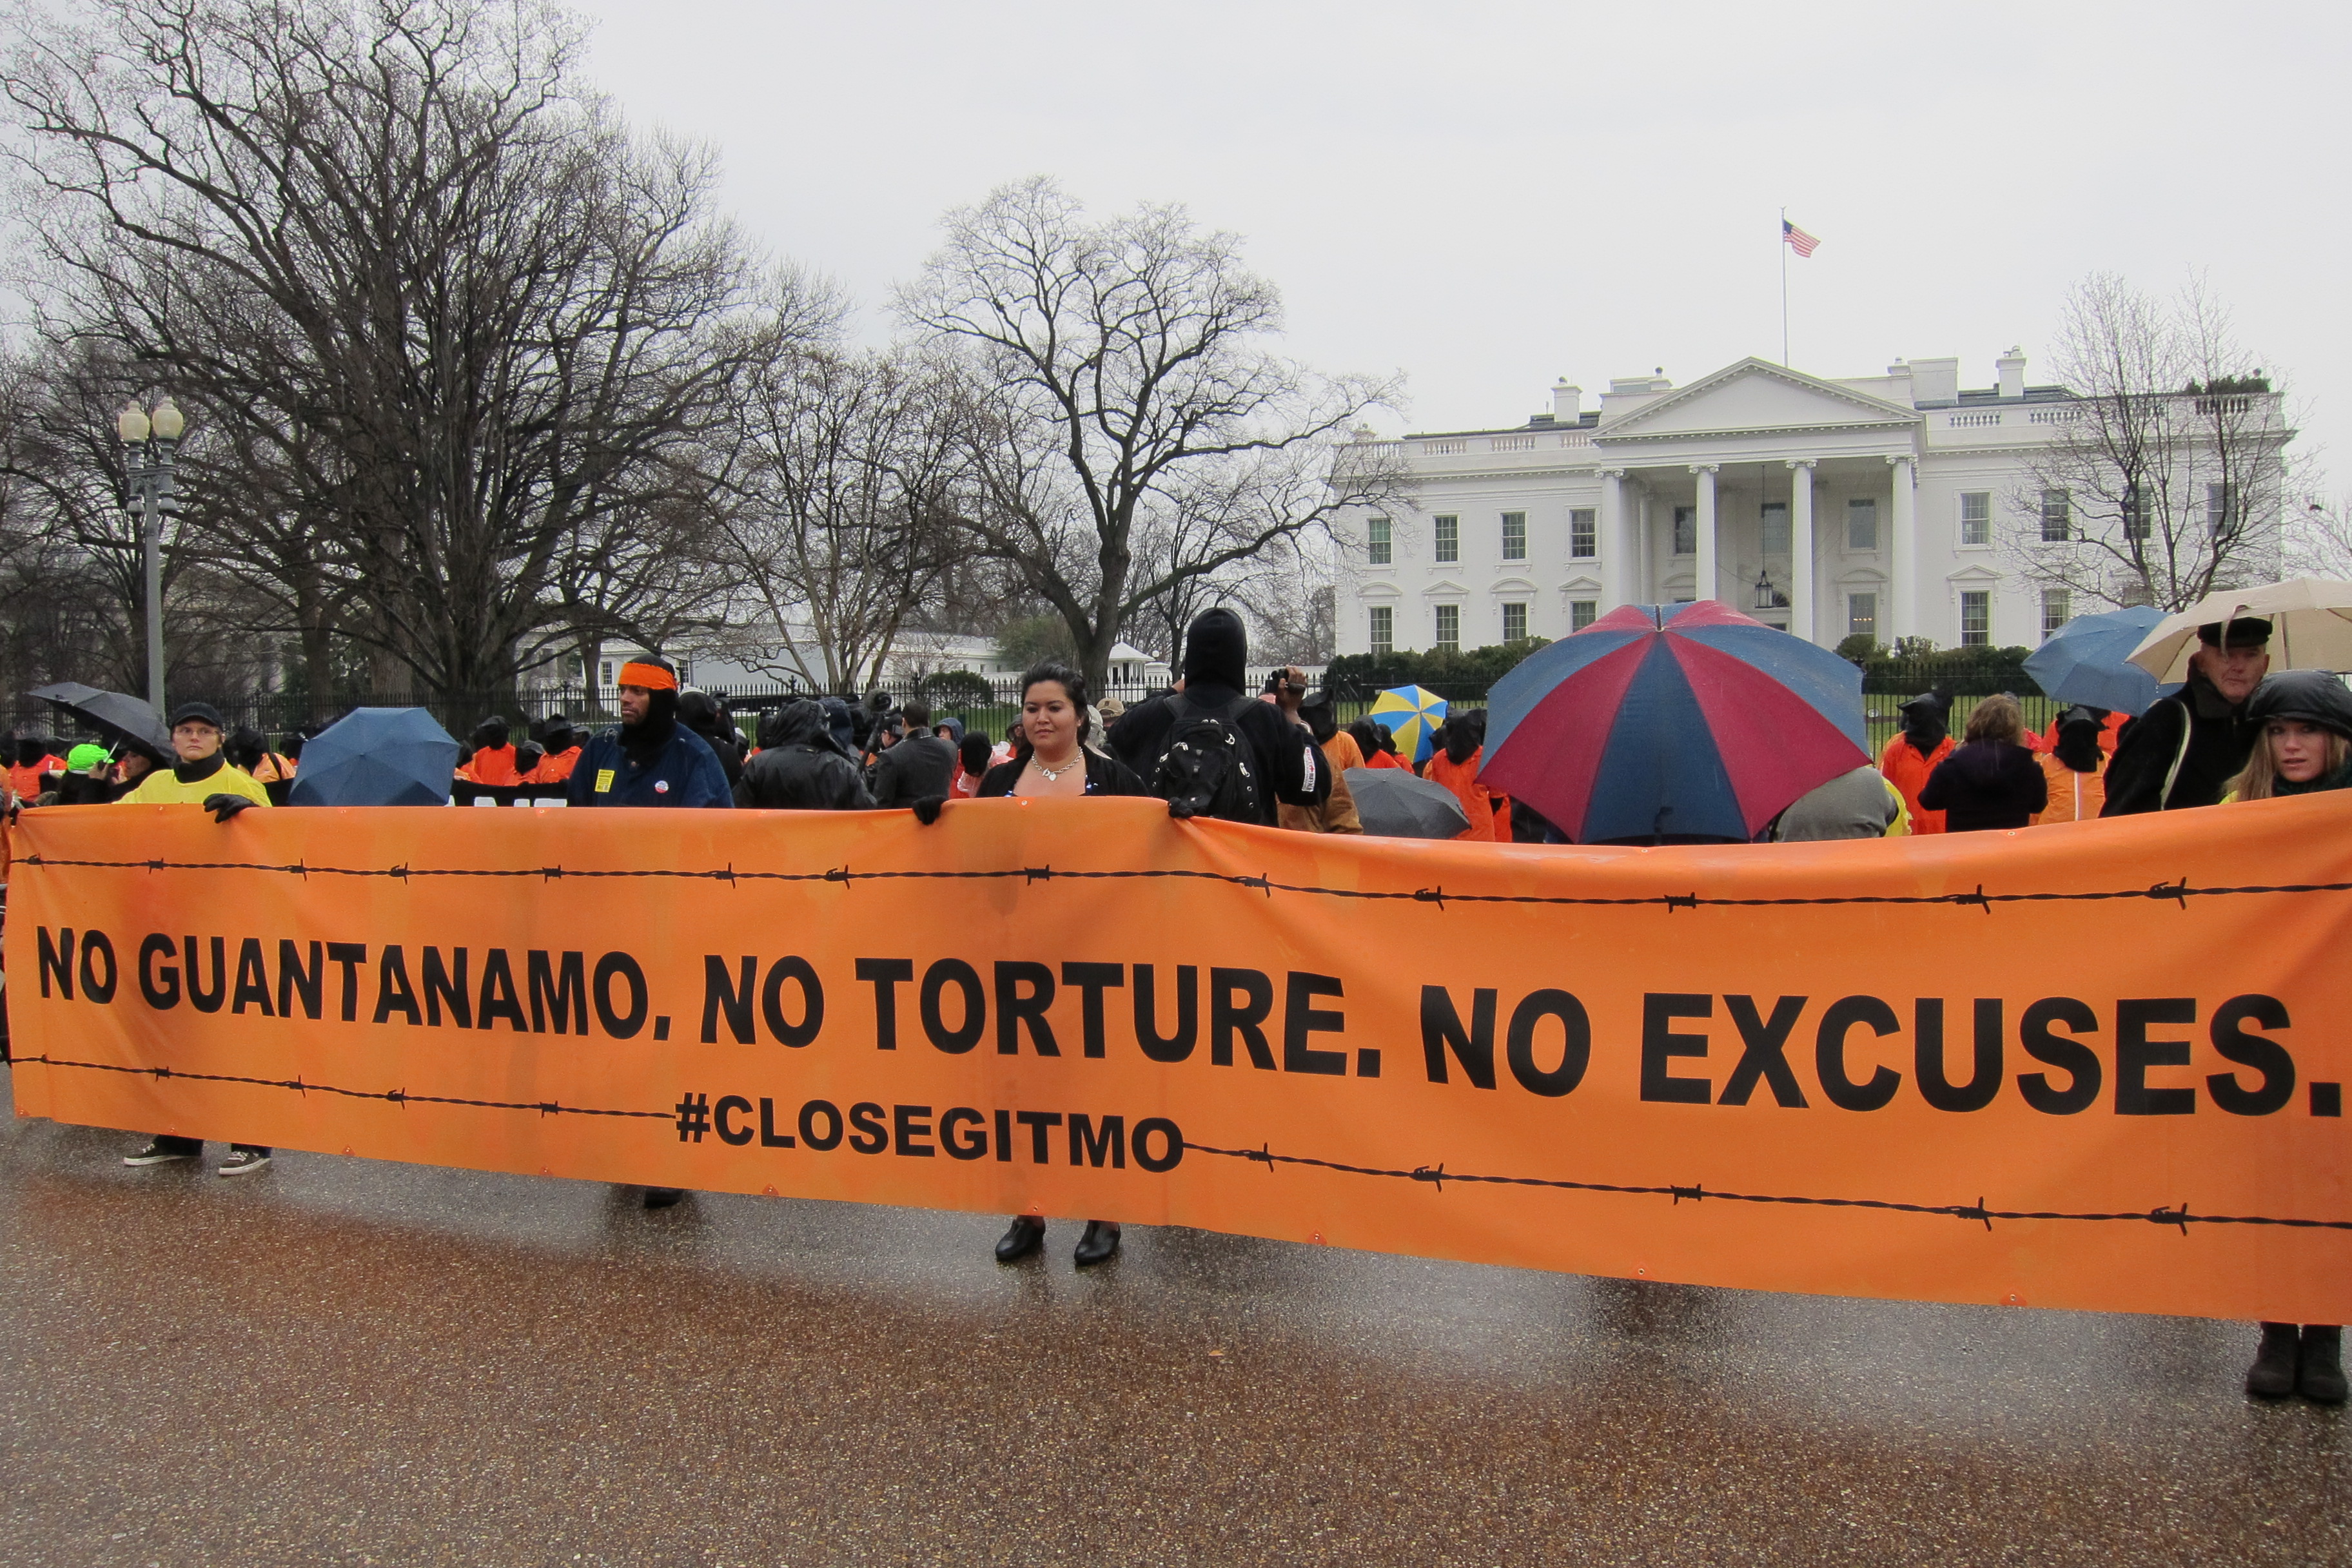 Protest at the White House against the prison at Guantanamo 